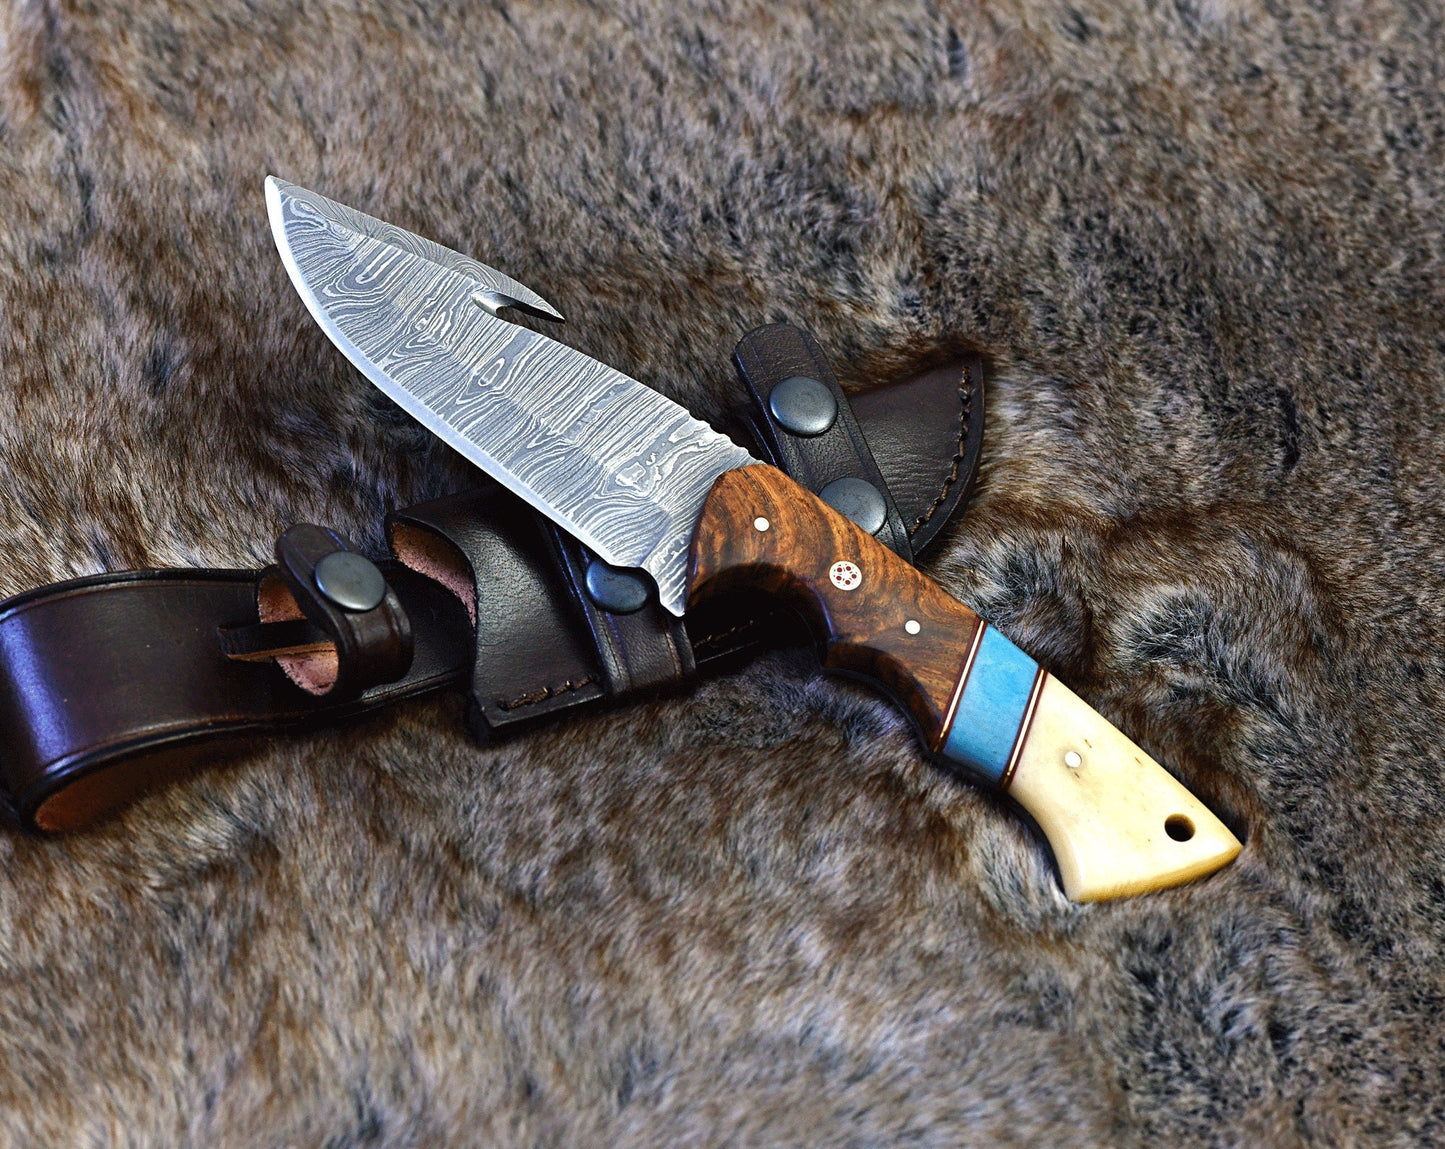 SHOKUNIN USA 10" Damascus Hunting Knife - Custom Steel Blade, Exotic Rosewood & Bone Handle, Personalized Gift for Him - Outdoor Gear - Groove Rabbit